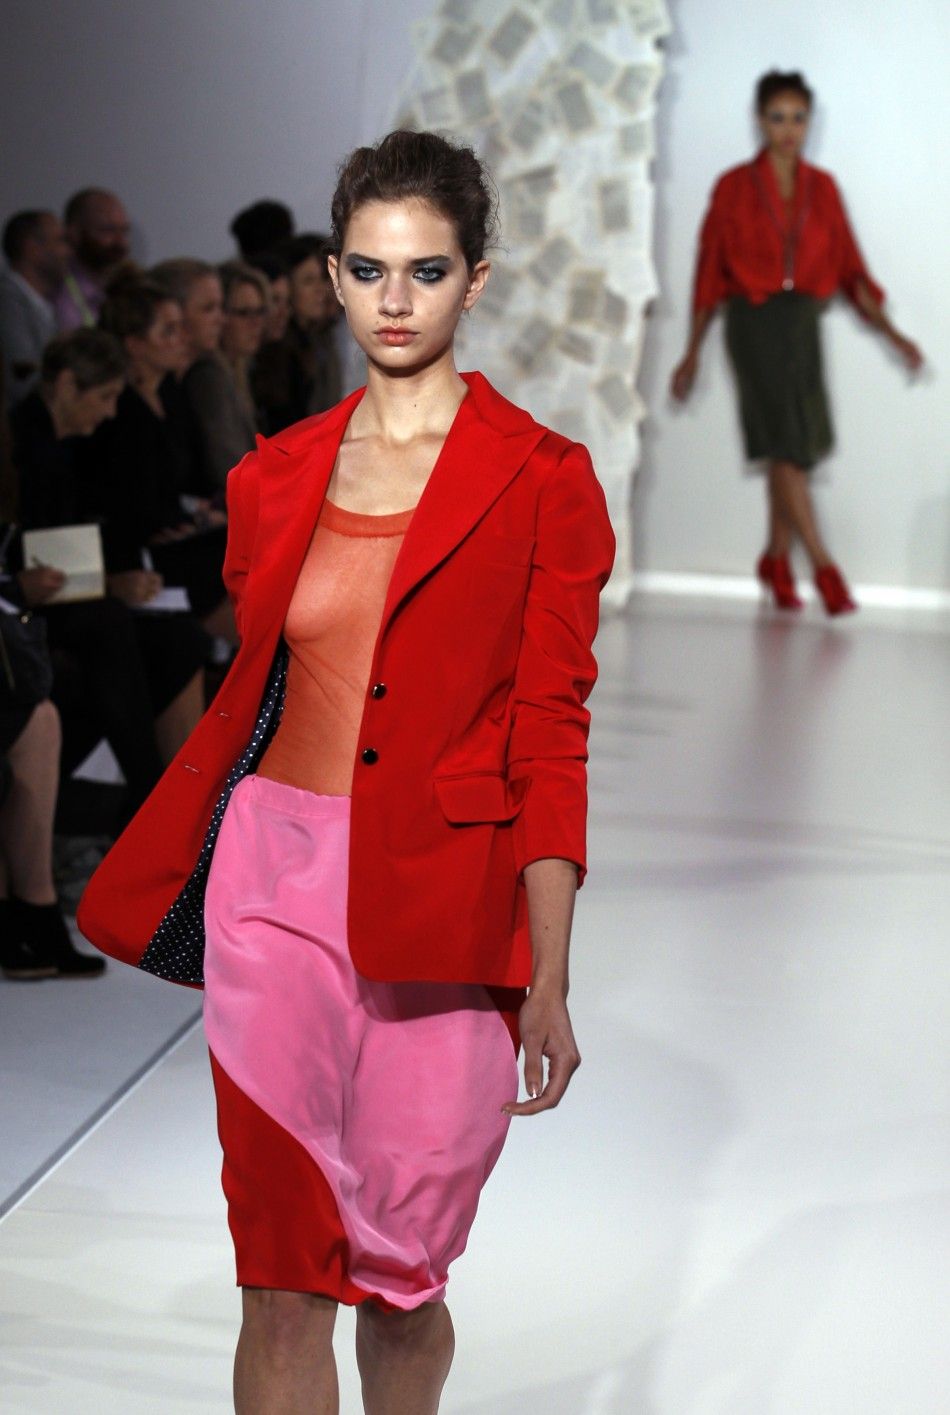 A model presents a creation from the Kinder Aggugini 2012 SpringSummer collection during London Fashion Week